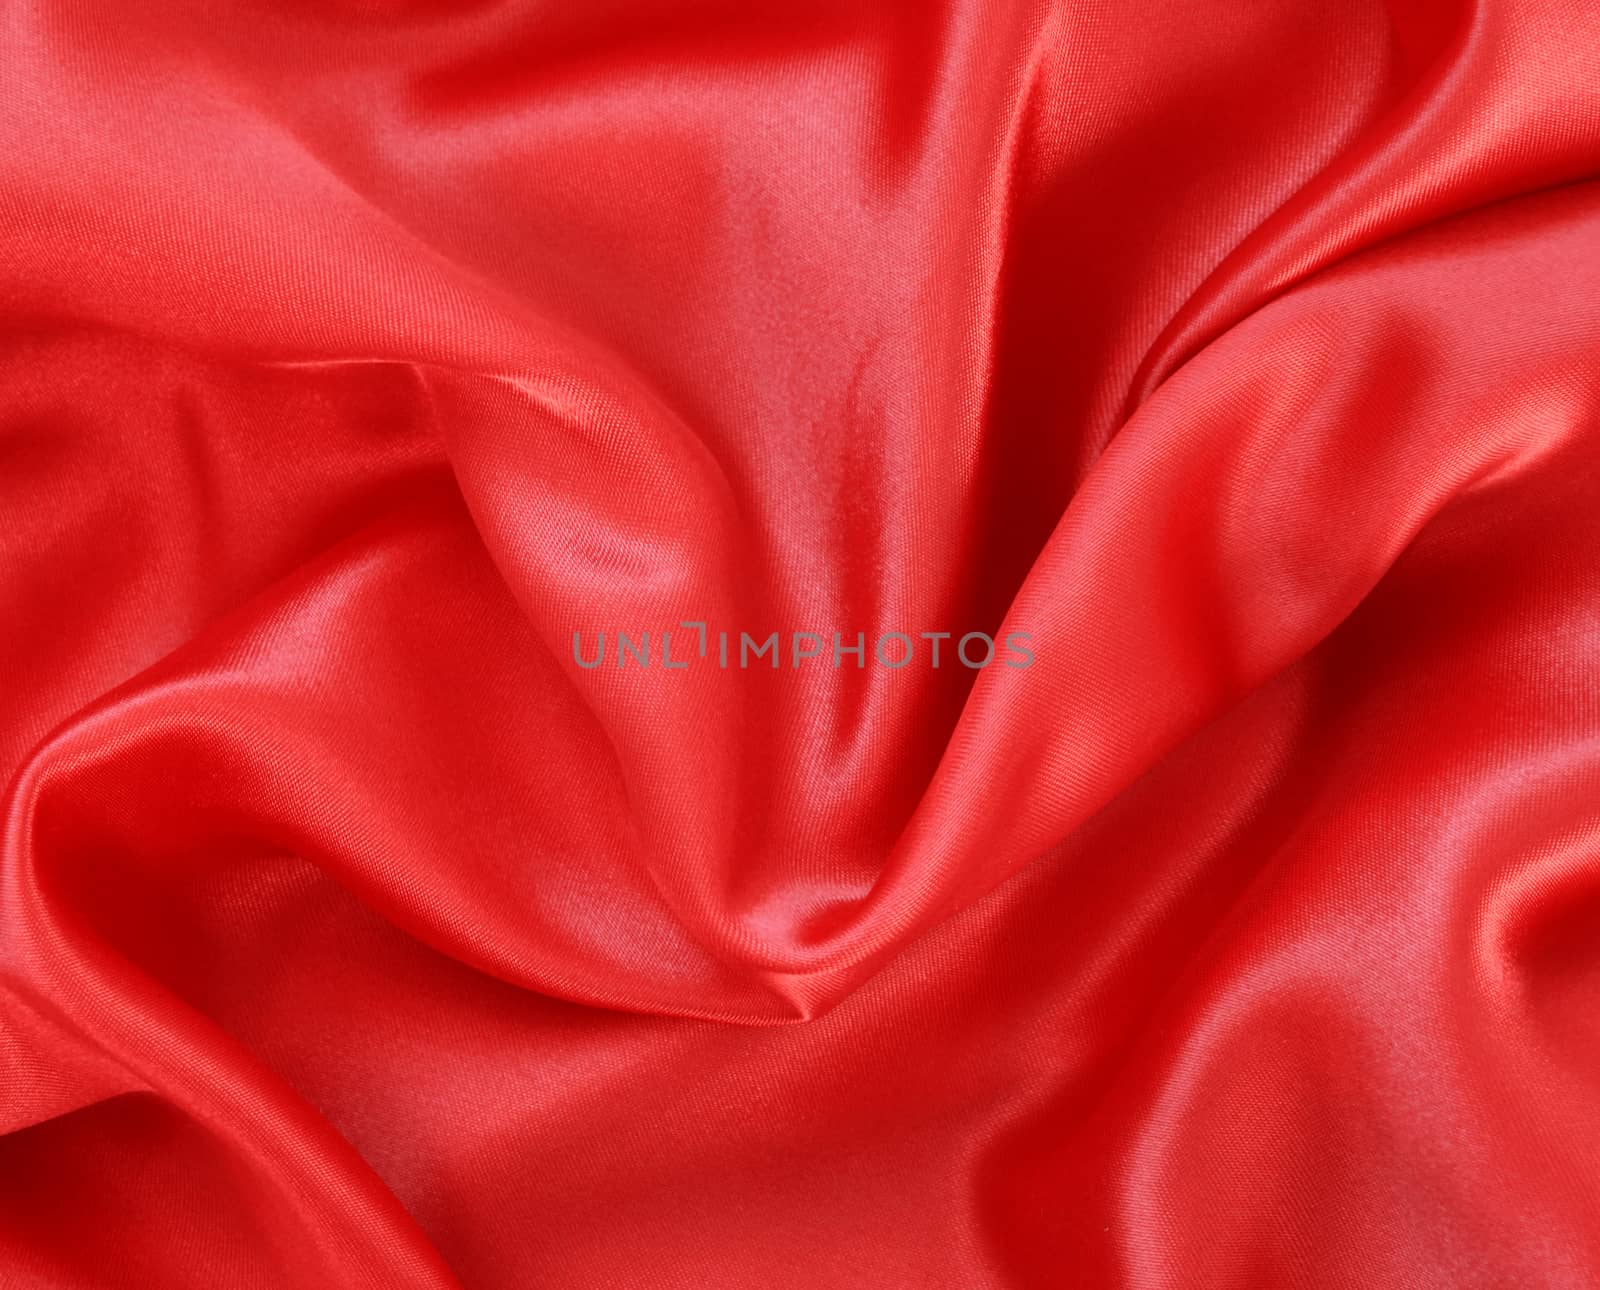 Smooth red silk can use as background 